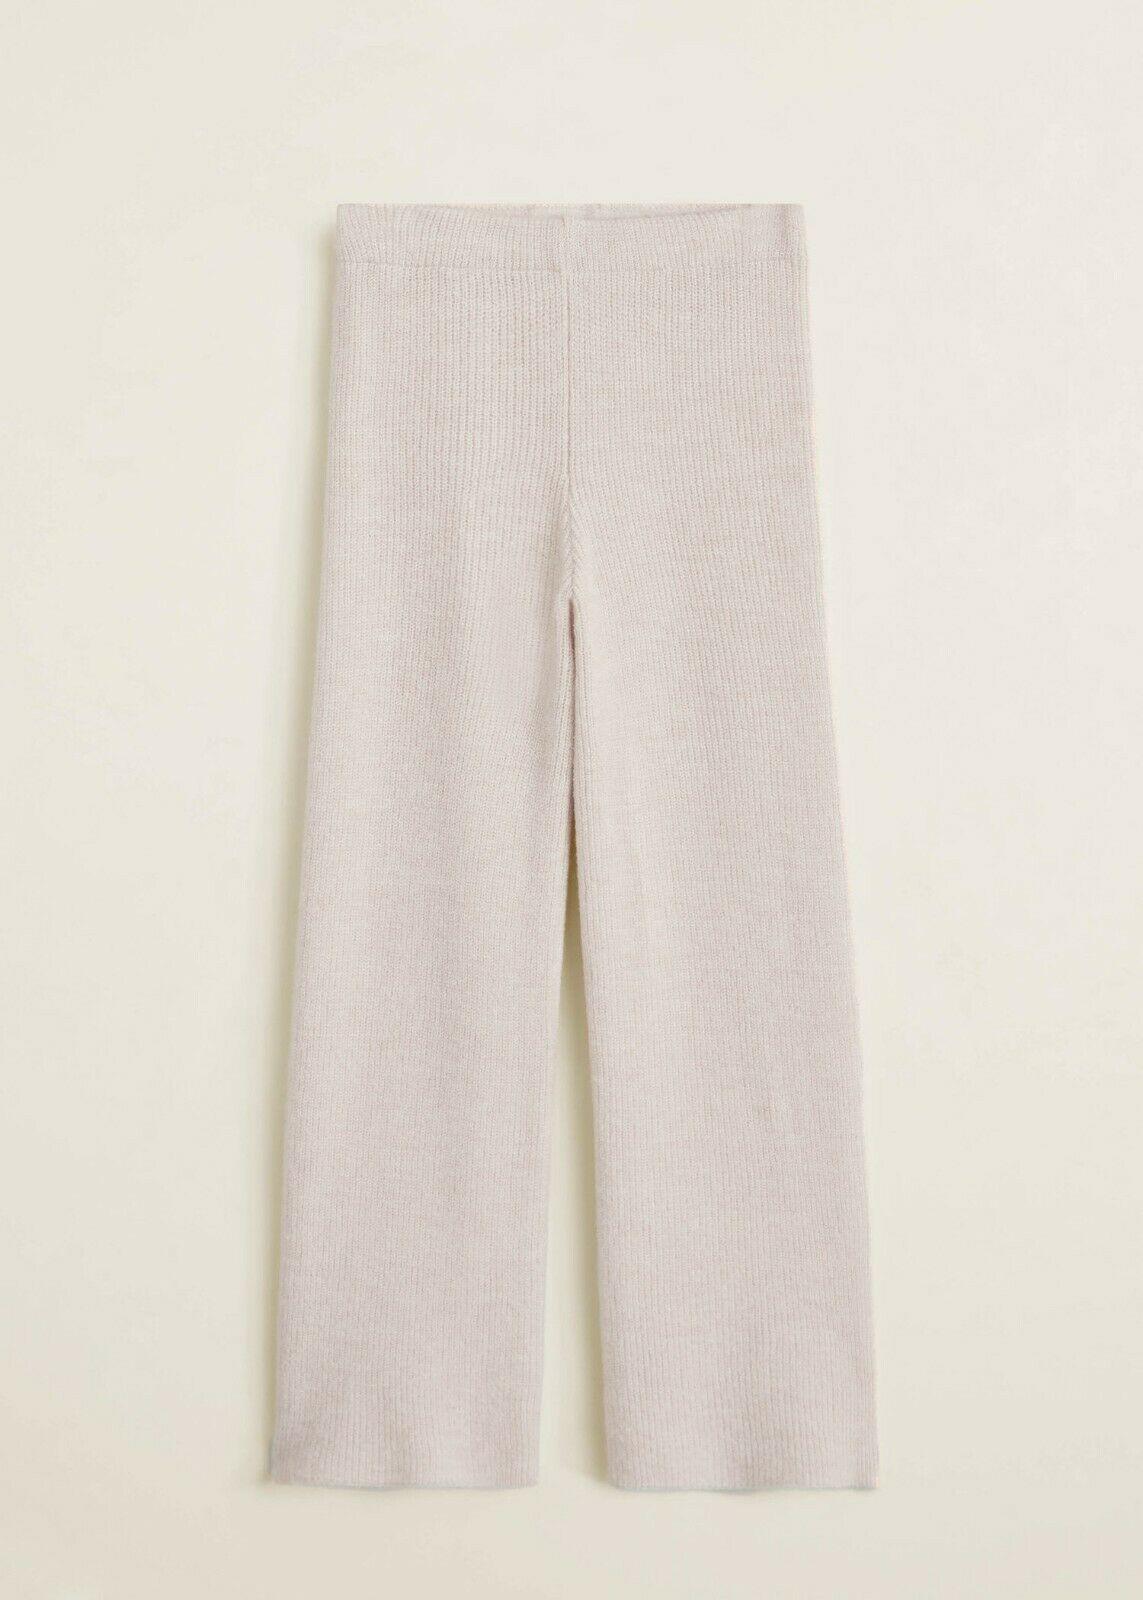 Mango Womens Knitted Pants Trousers Beige Size M - SVNYFancy